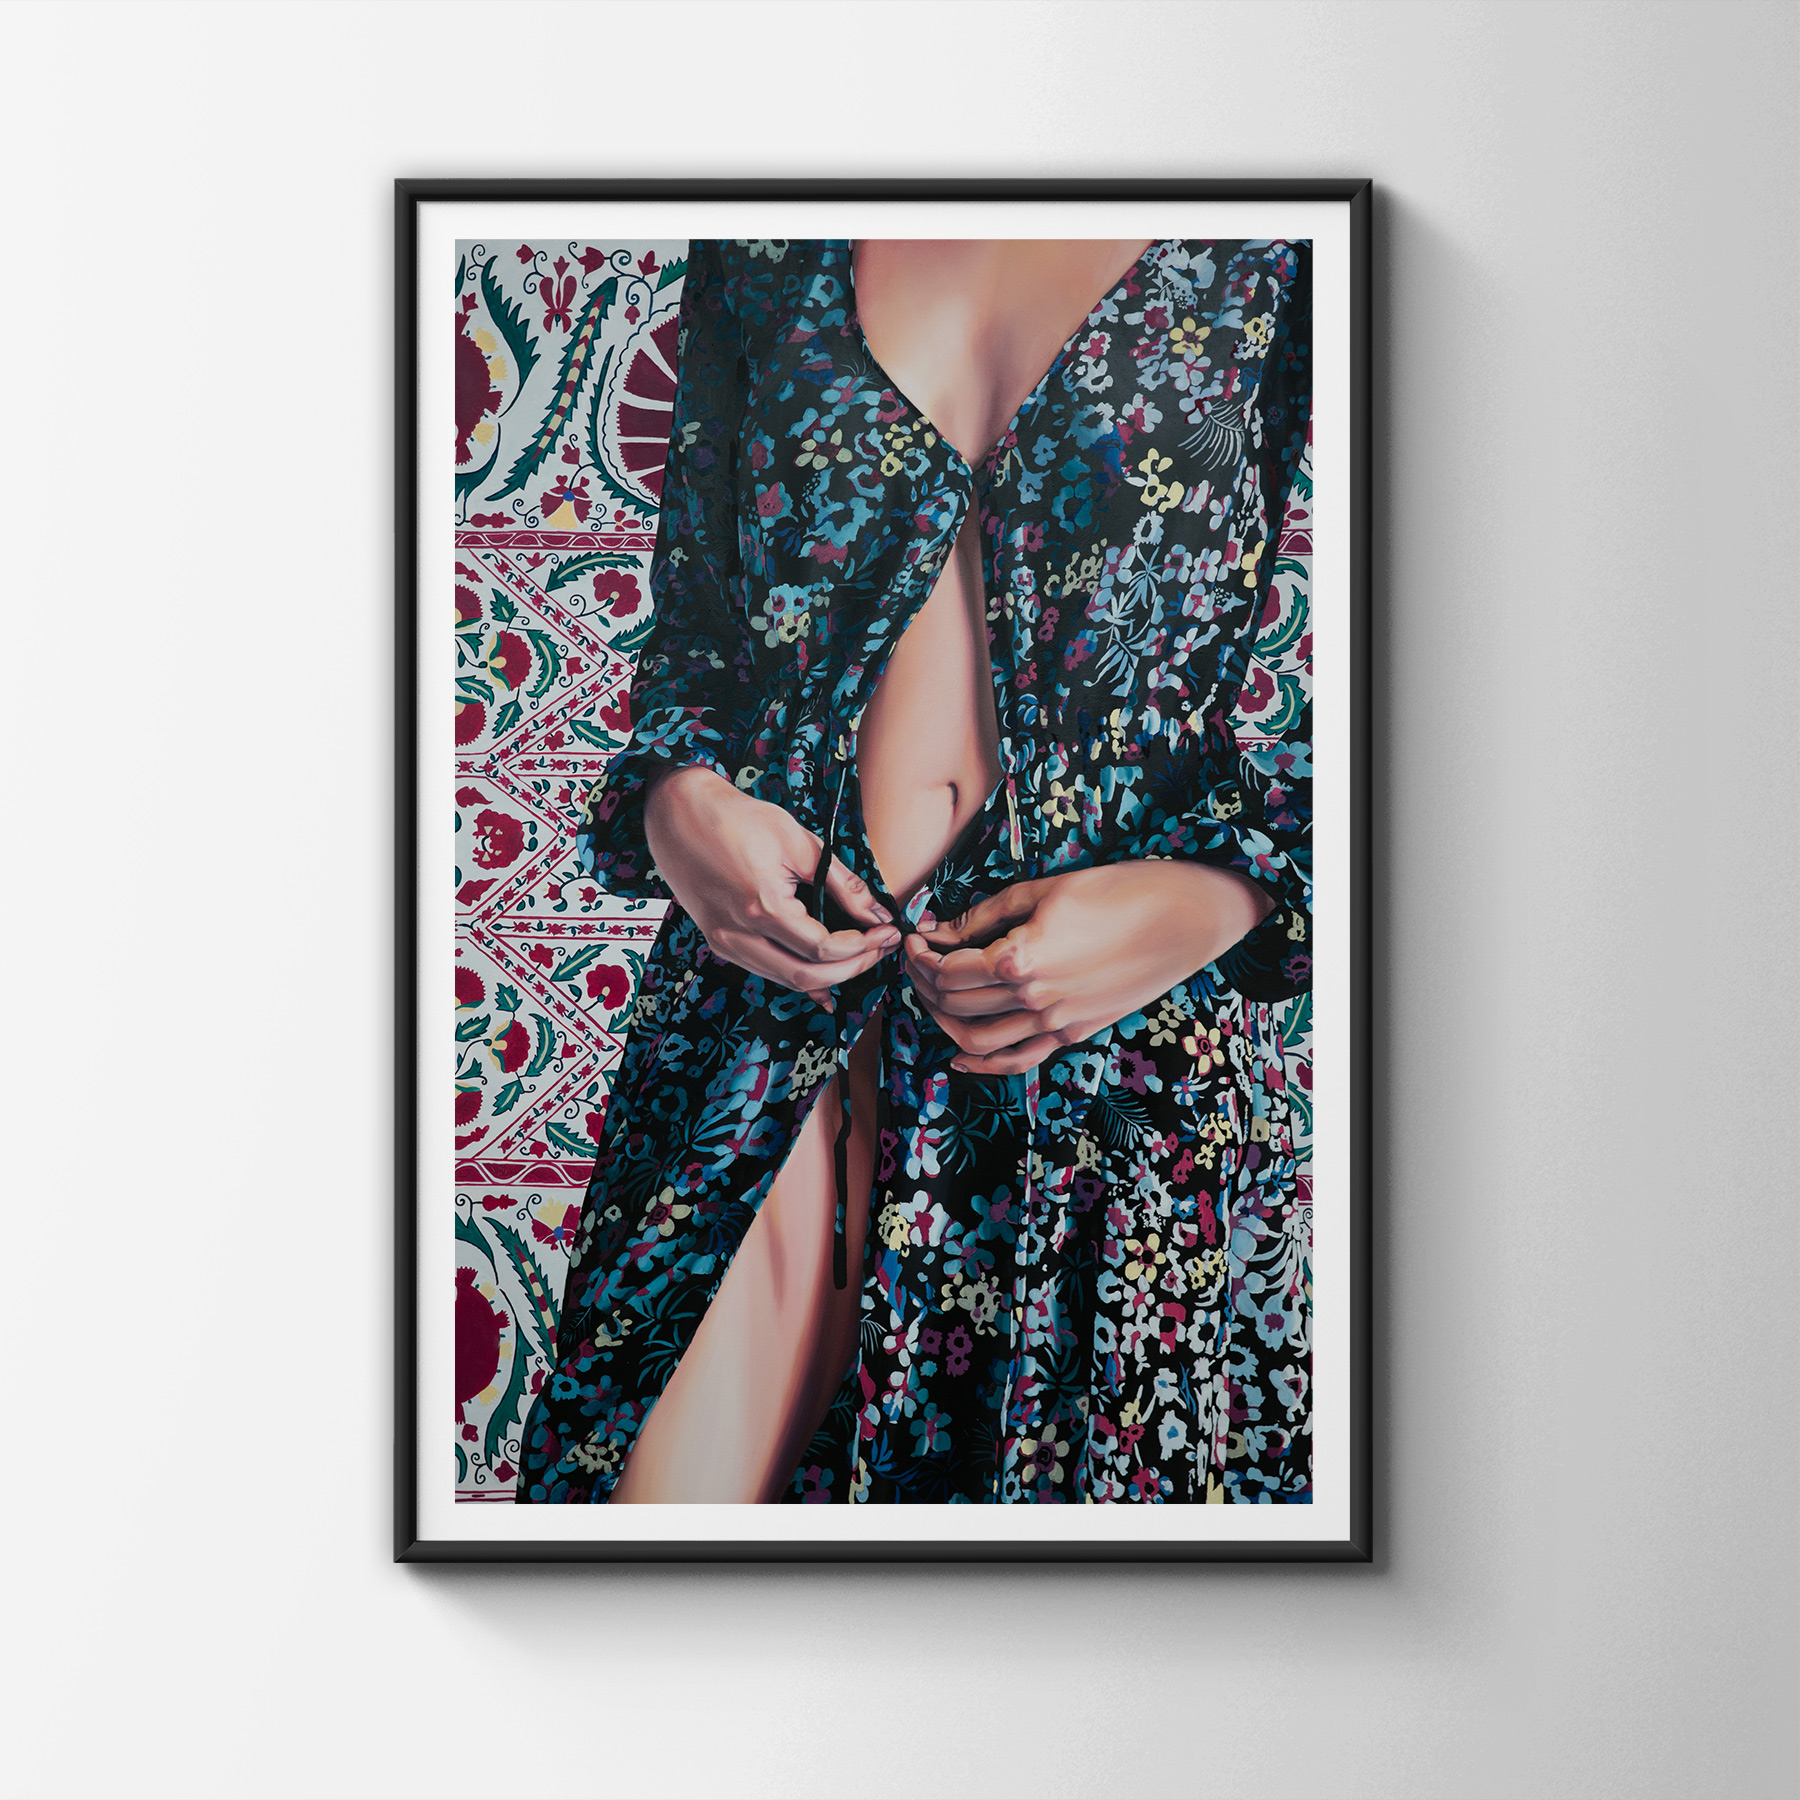 posters, giclee, aesthetic, figurative, landscape, portraiture, bodies, botany, patterns, sexuality, beige, blue, red, white, ink, paper, contemporary-art, design, erotic, female, flowers, interior, interior-design, modern, modern-art, natural, naturalism, nordic, plants, romantic, scandinavien, sexual, women, Buy original high quality art. Paintings, drawings, limited edition prints & posters by talented artists.